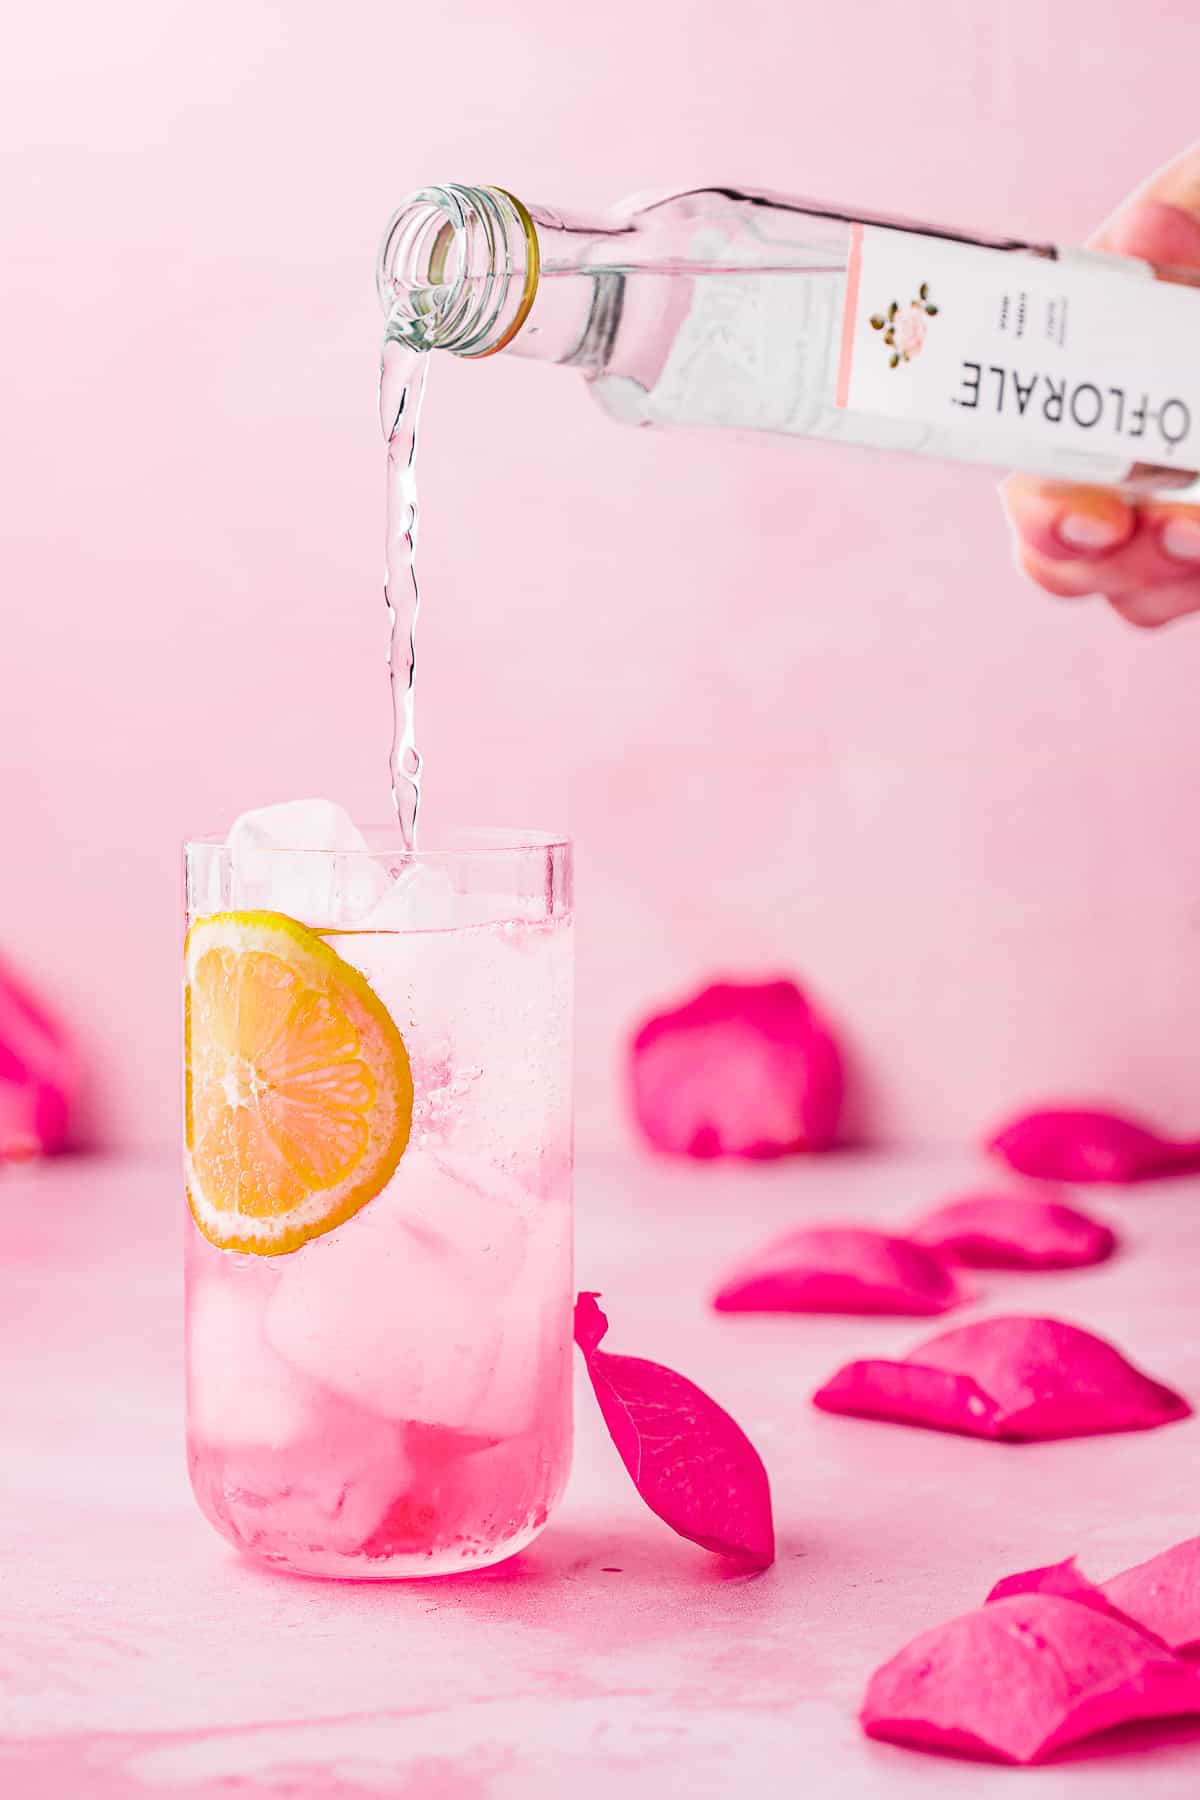 rose water being poured into a glass with a garnish of sliced lemon.